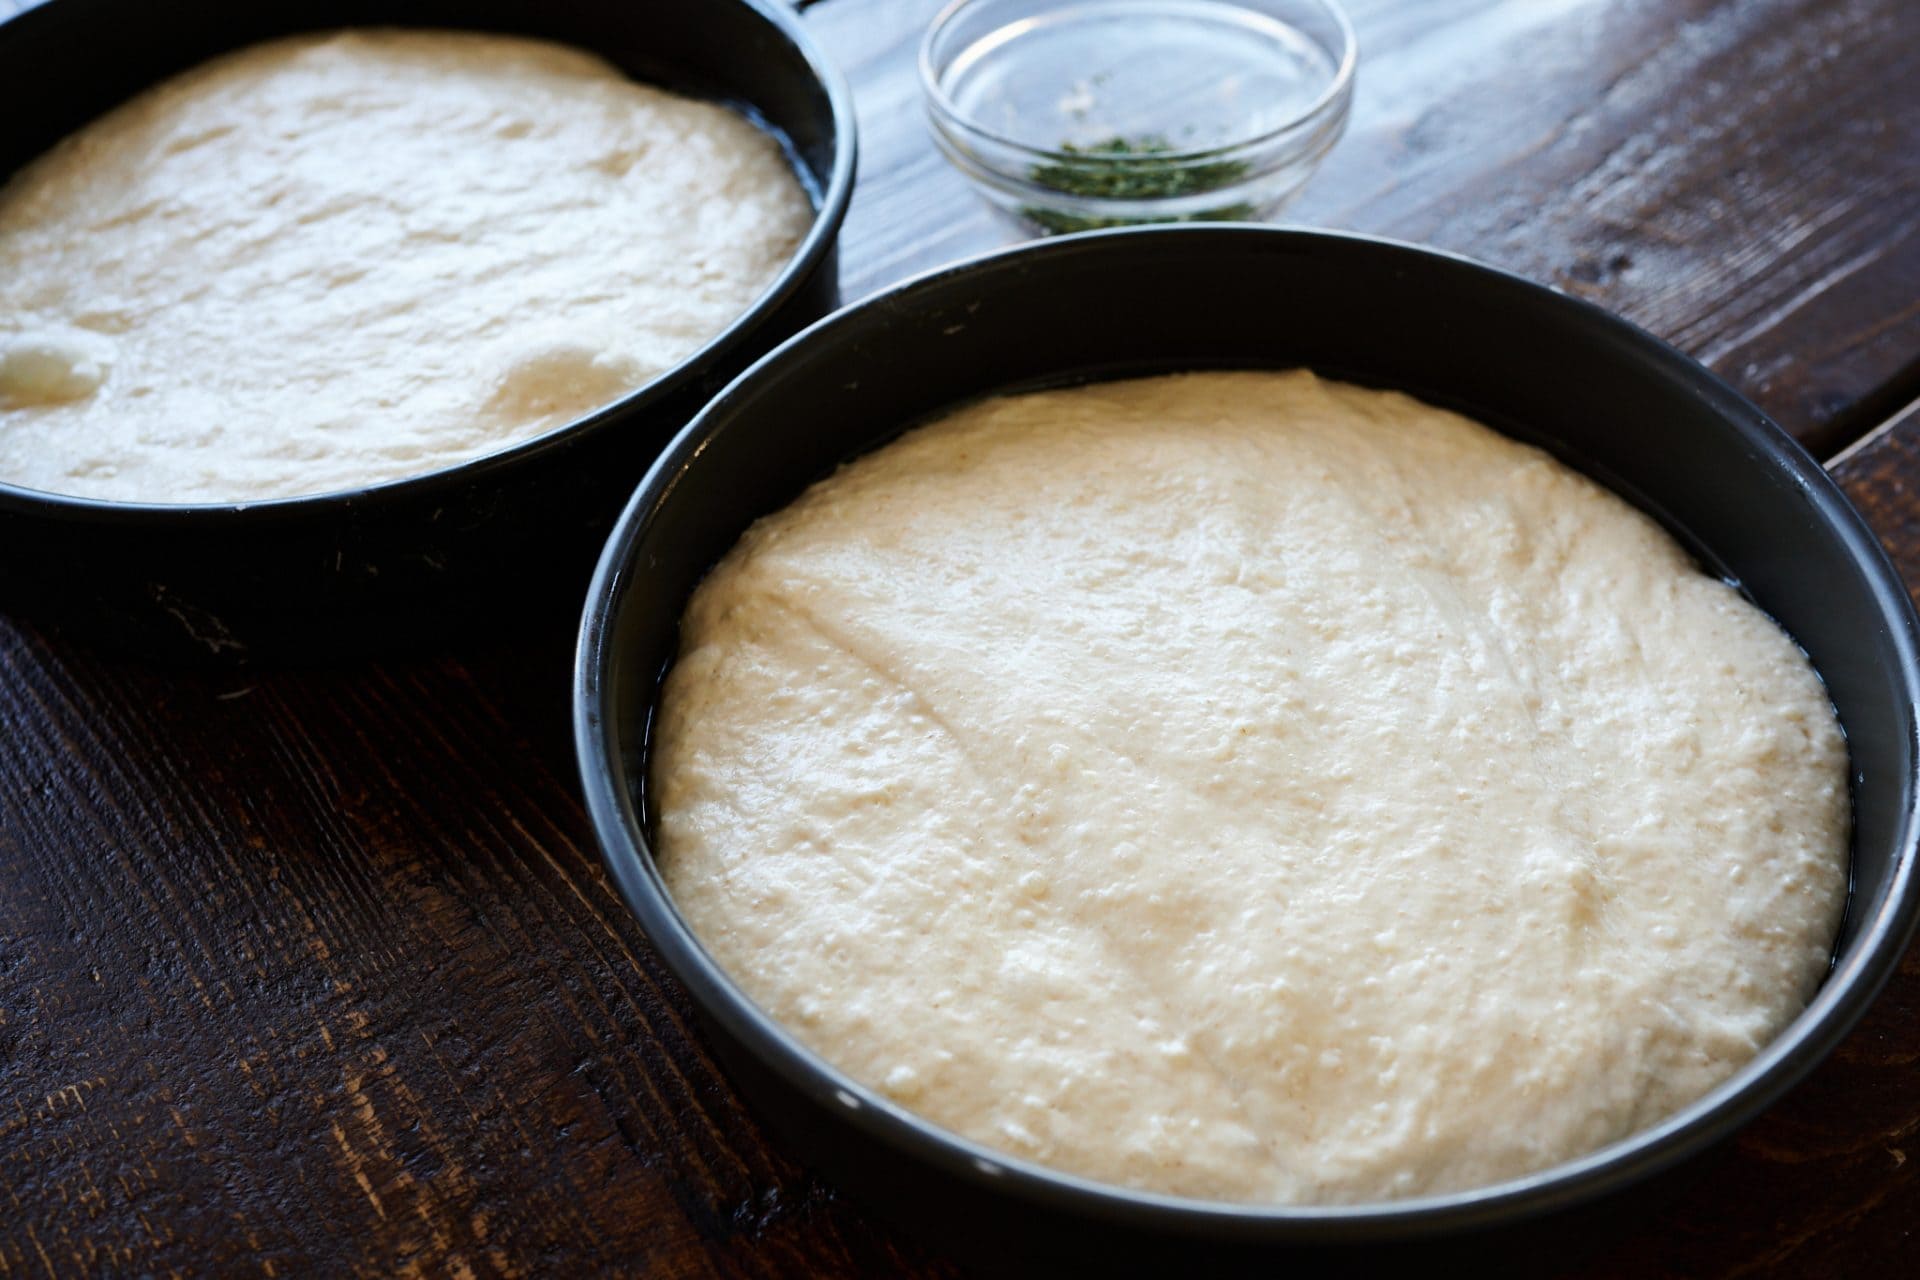 Focaccia dough fully proofed